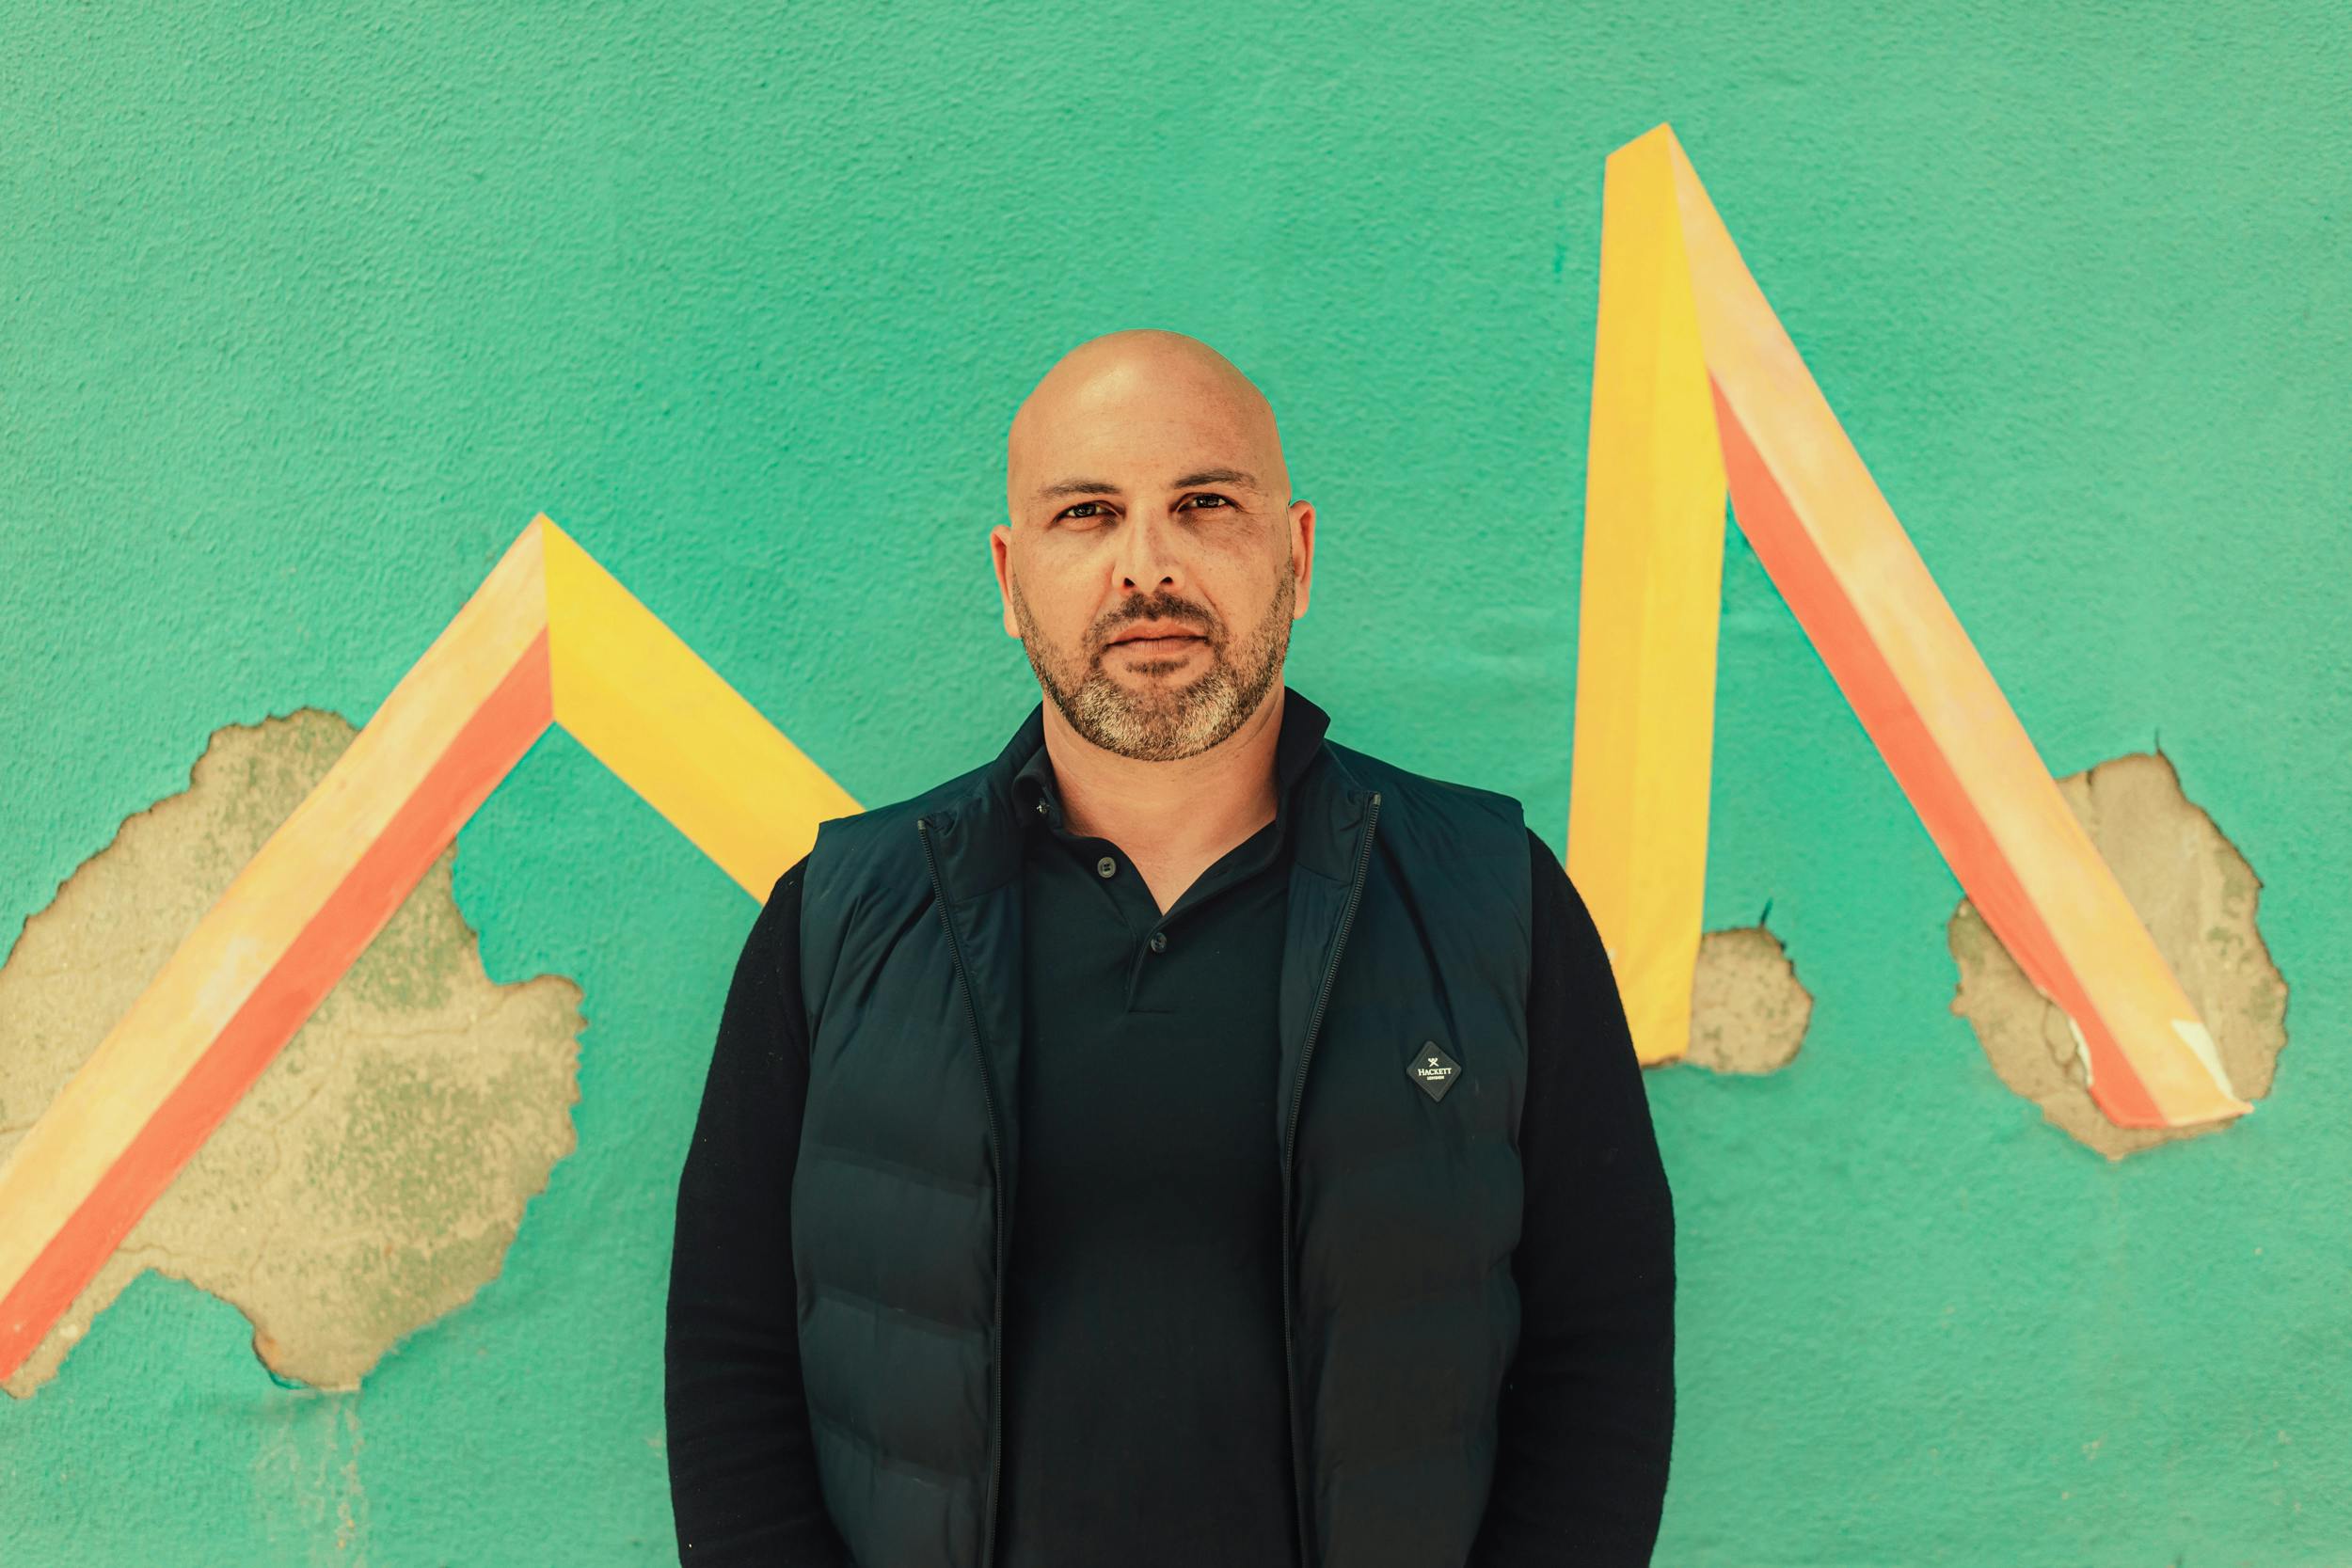 Bald man looking serious in front of a green wall with the letter M drawn